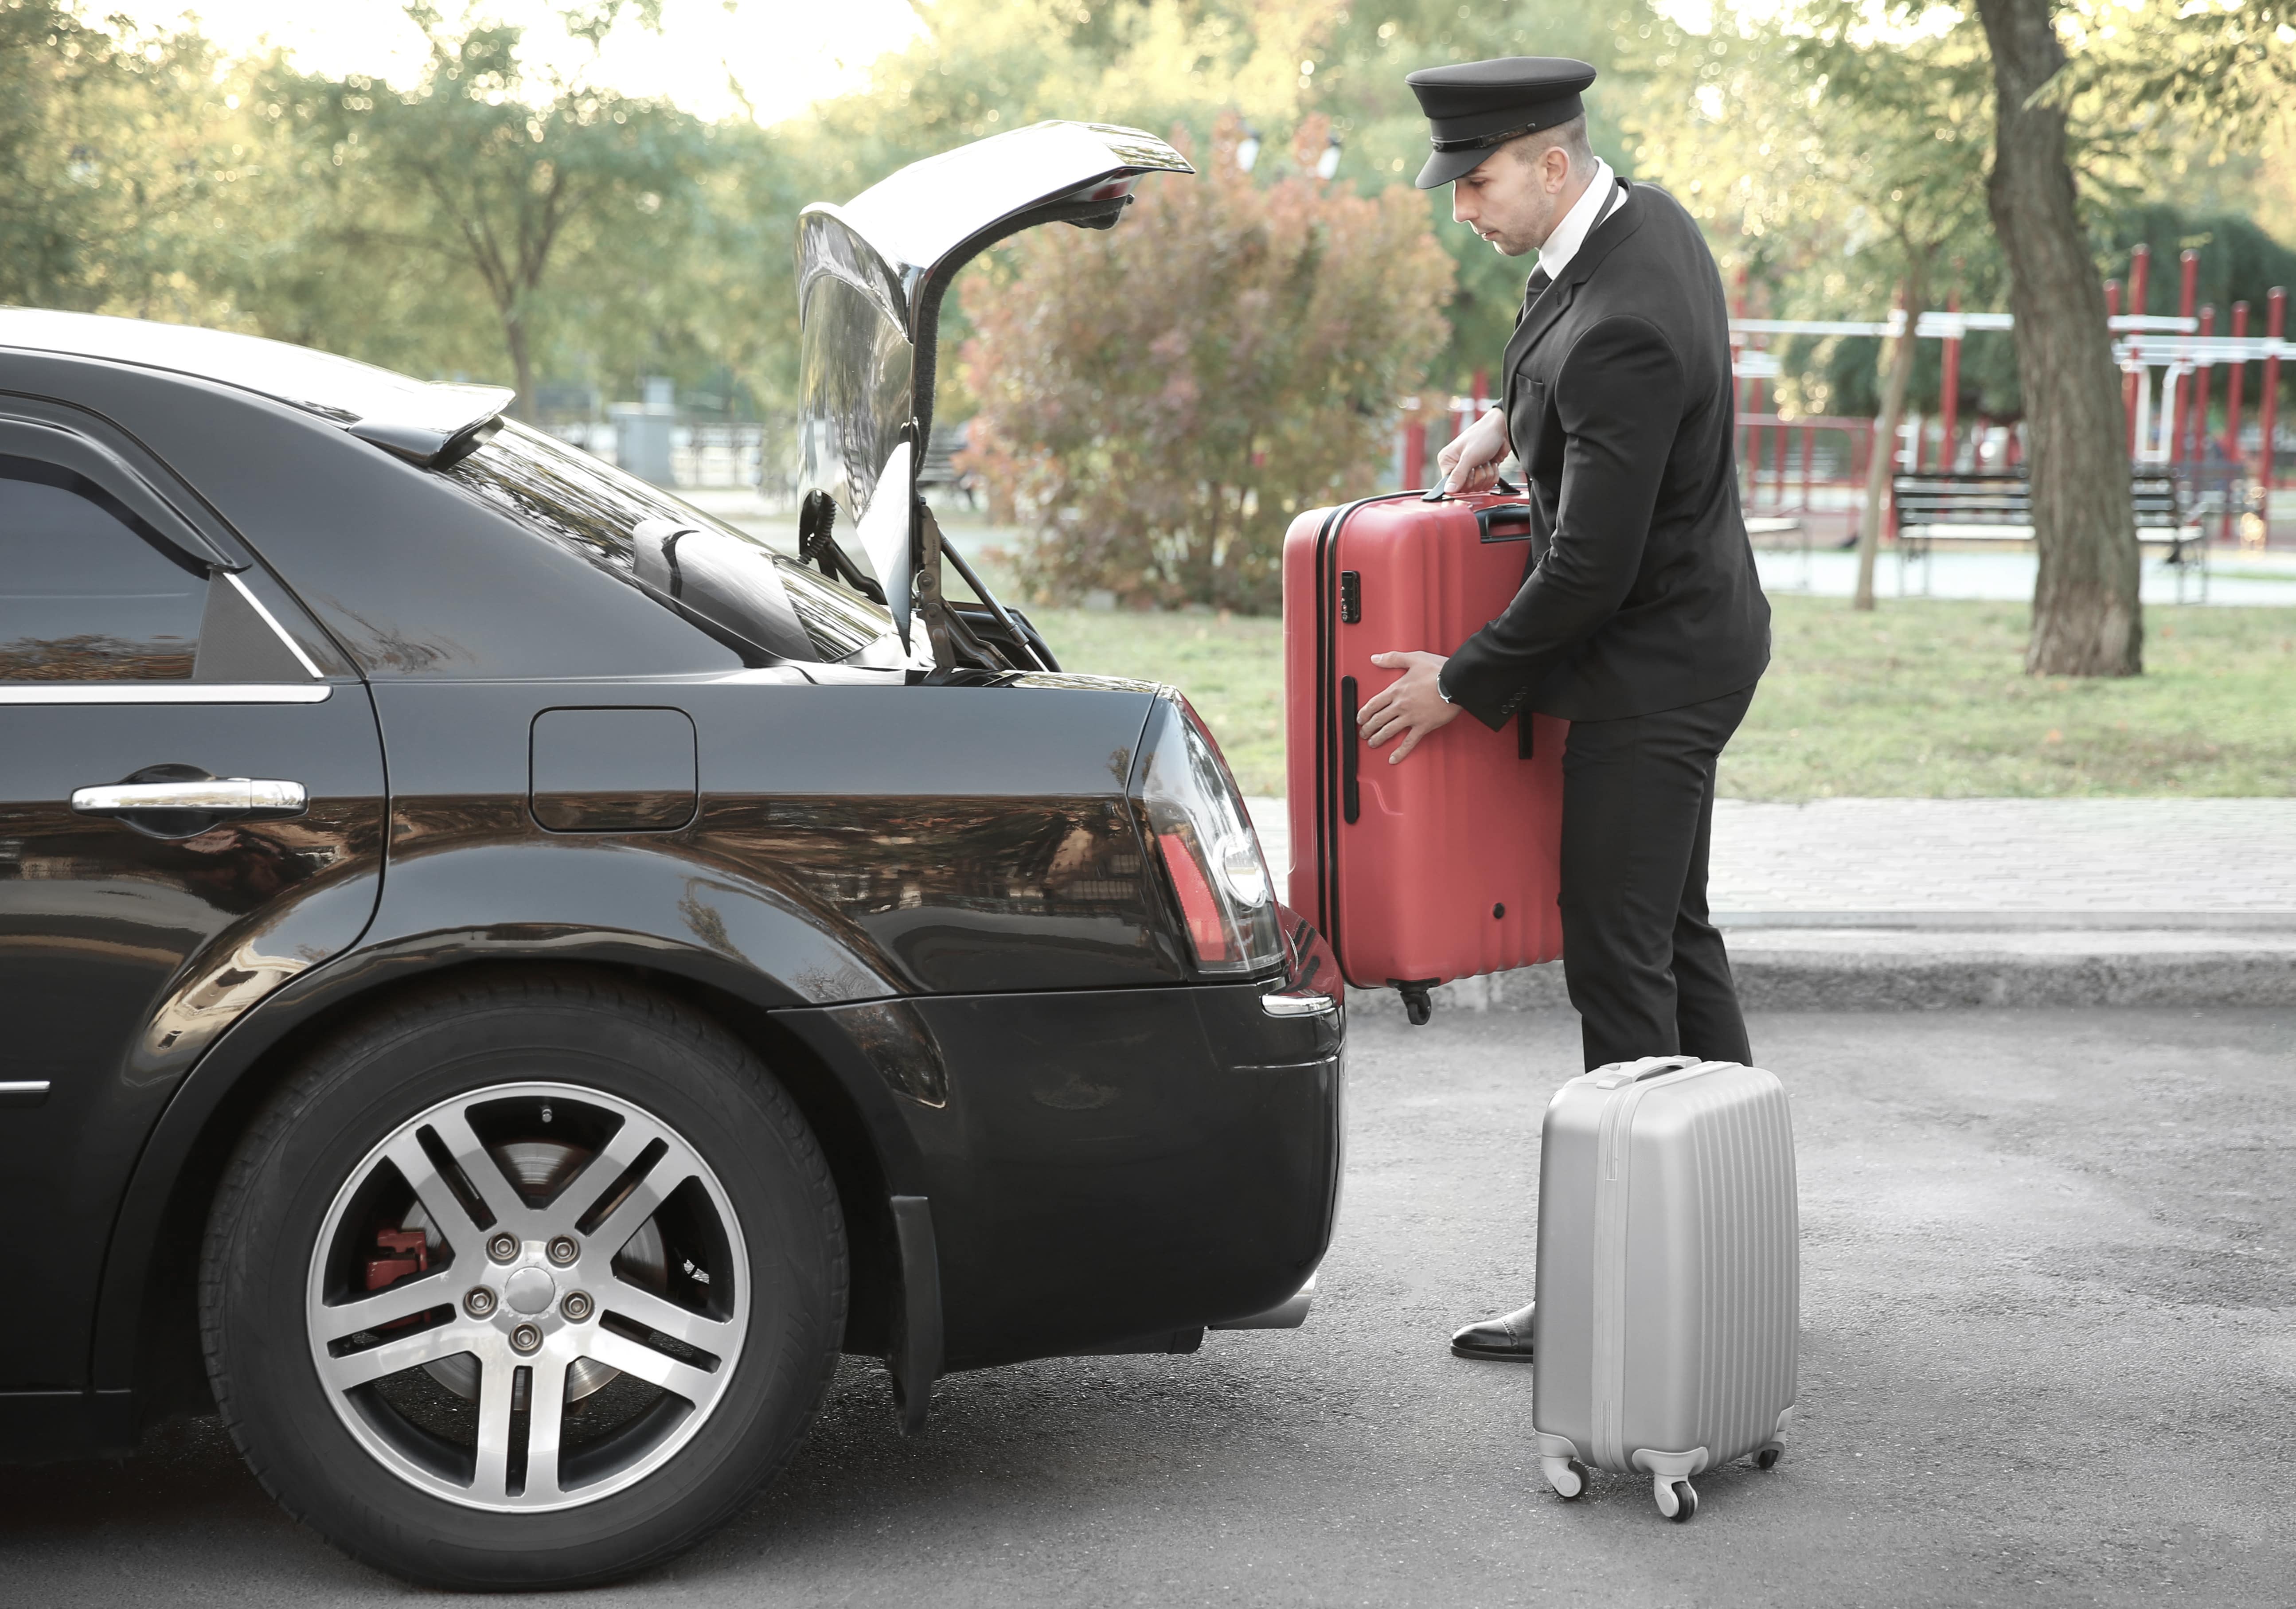 fly drvn's door-to-door long distance car service takes the hassle out of long commercial air travel.